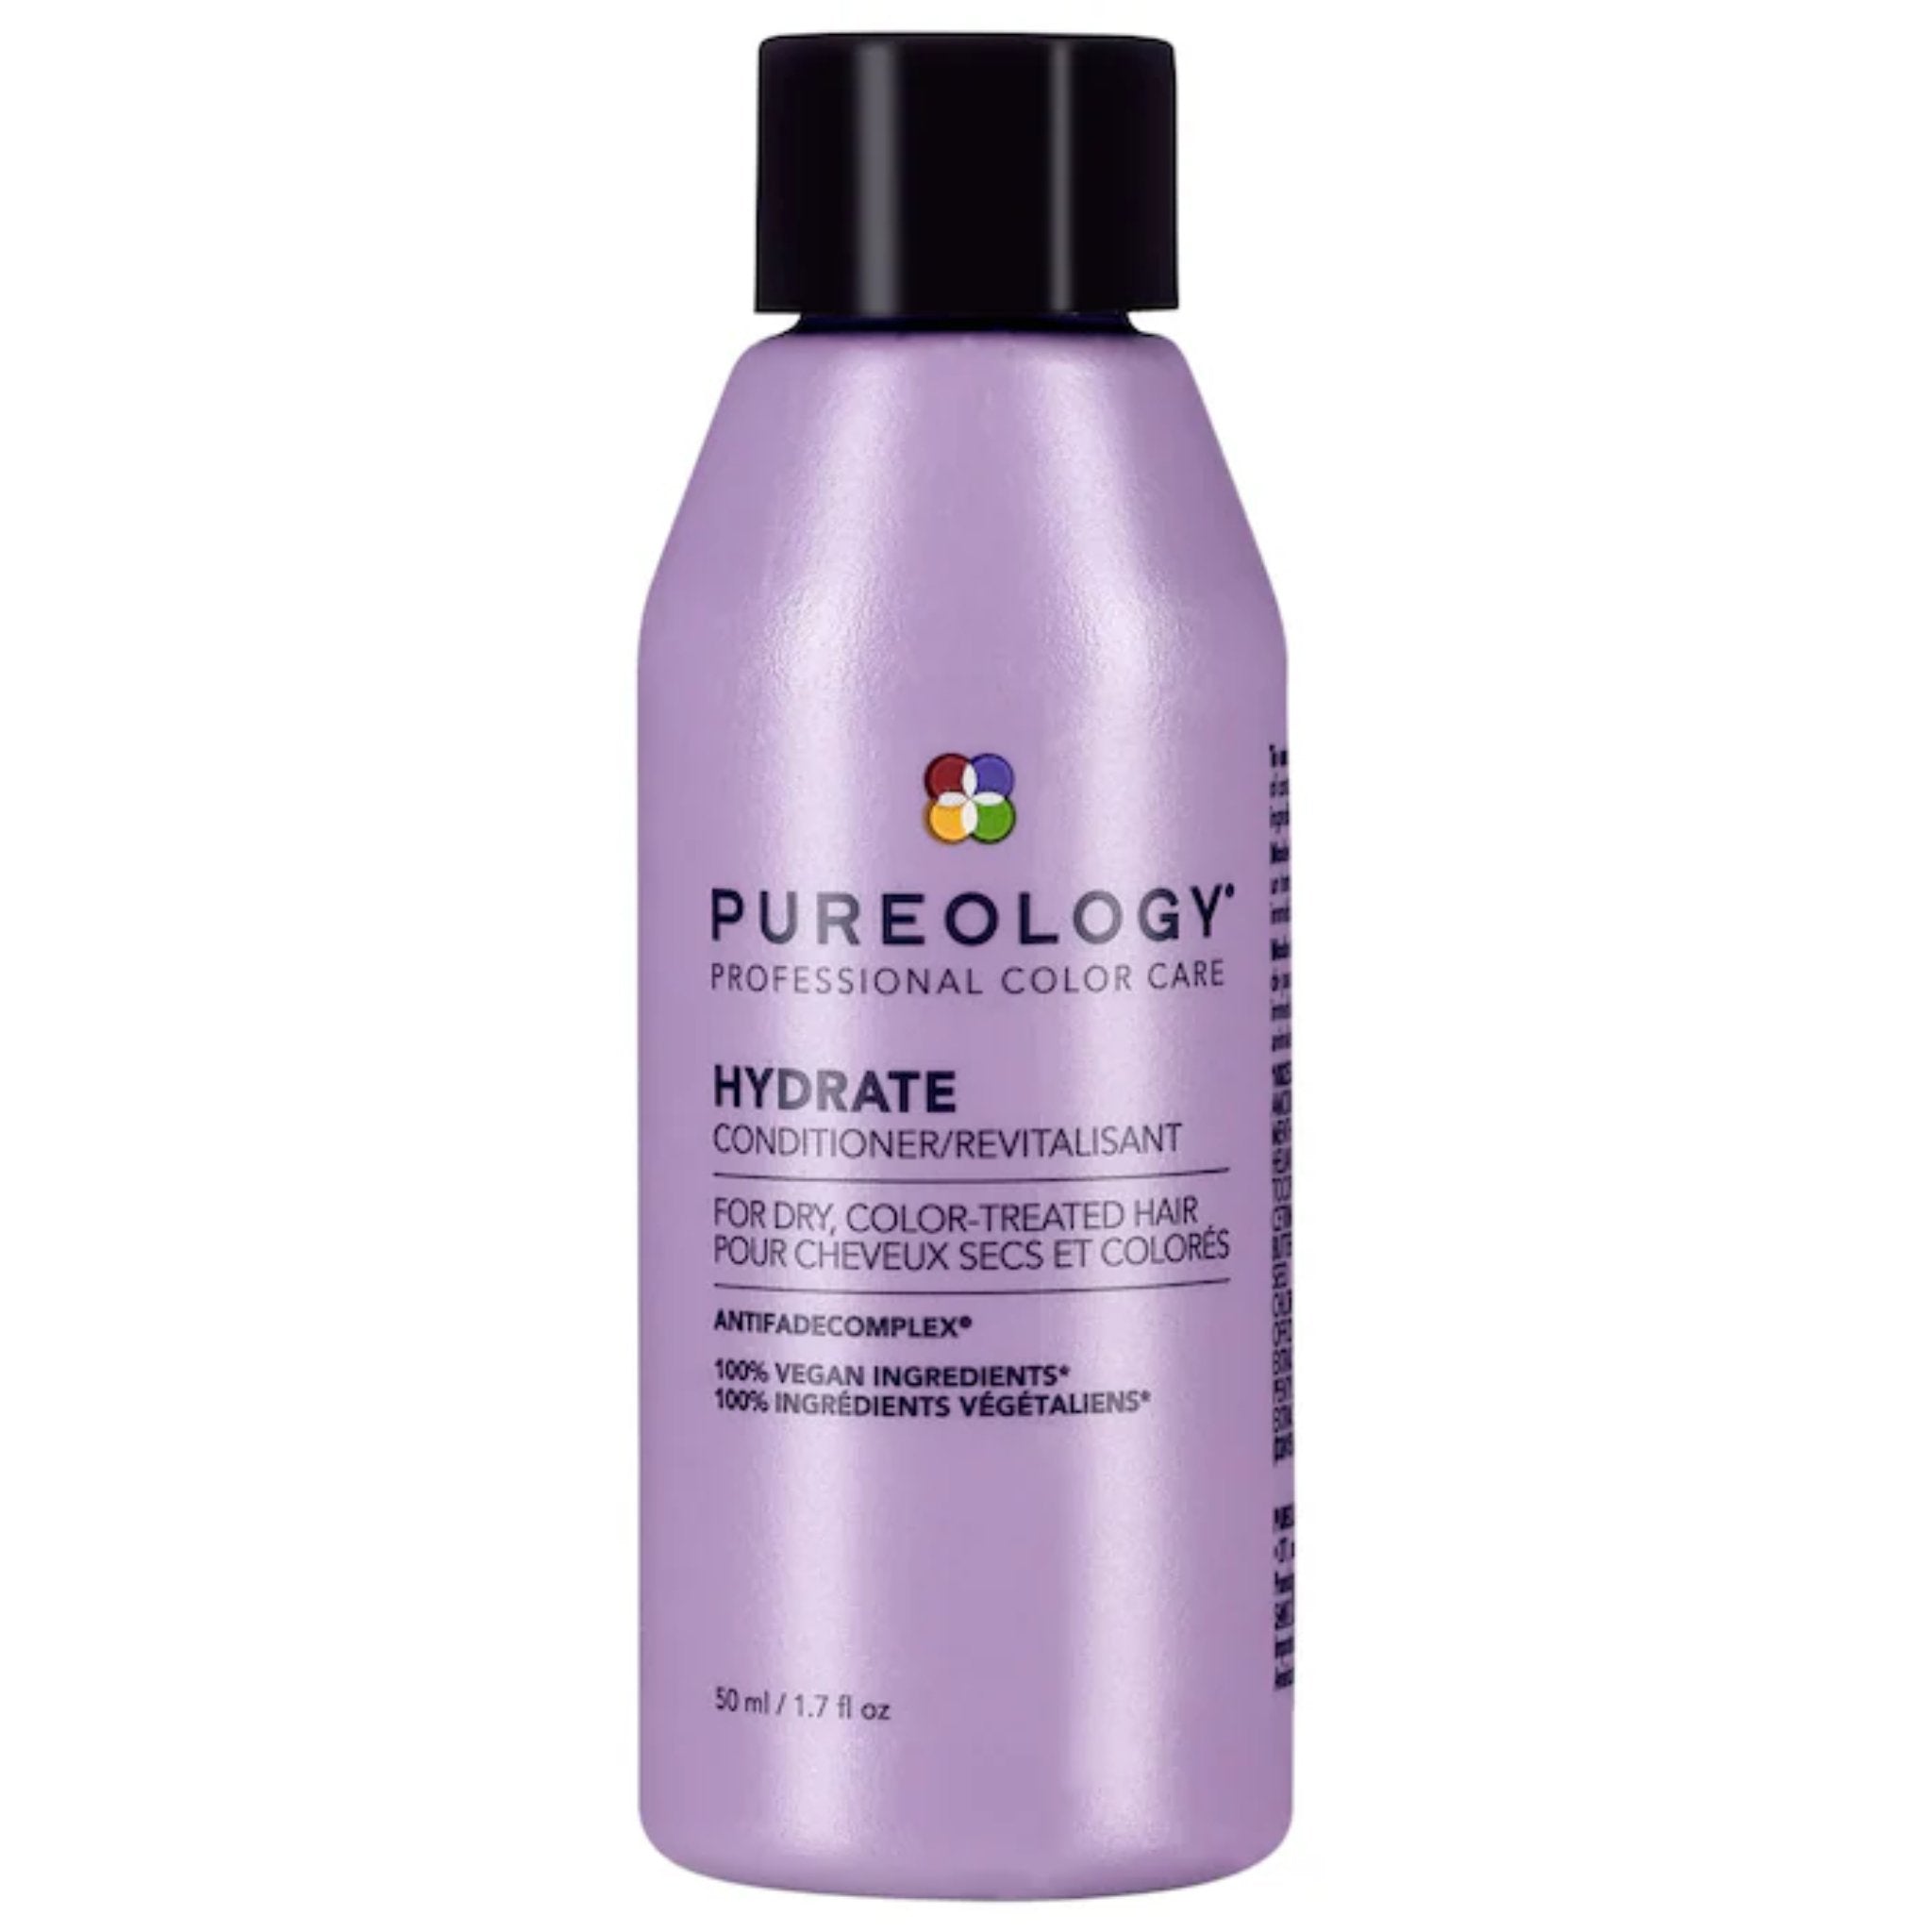 Pureology. Revitalisant Hydrate - 50 ml - Concept C. Shop